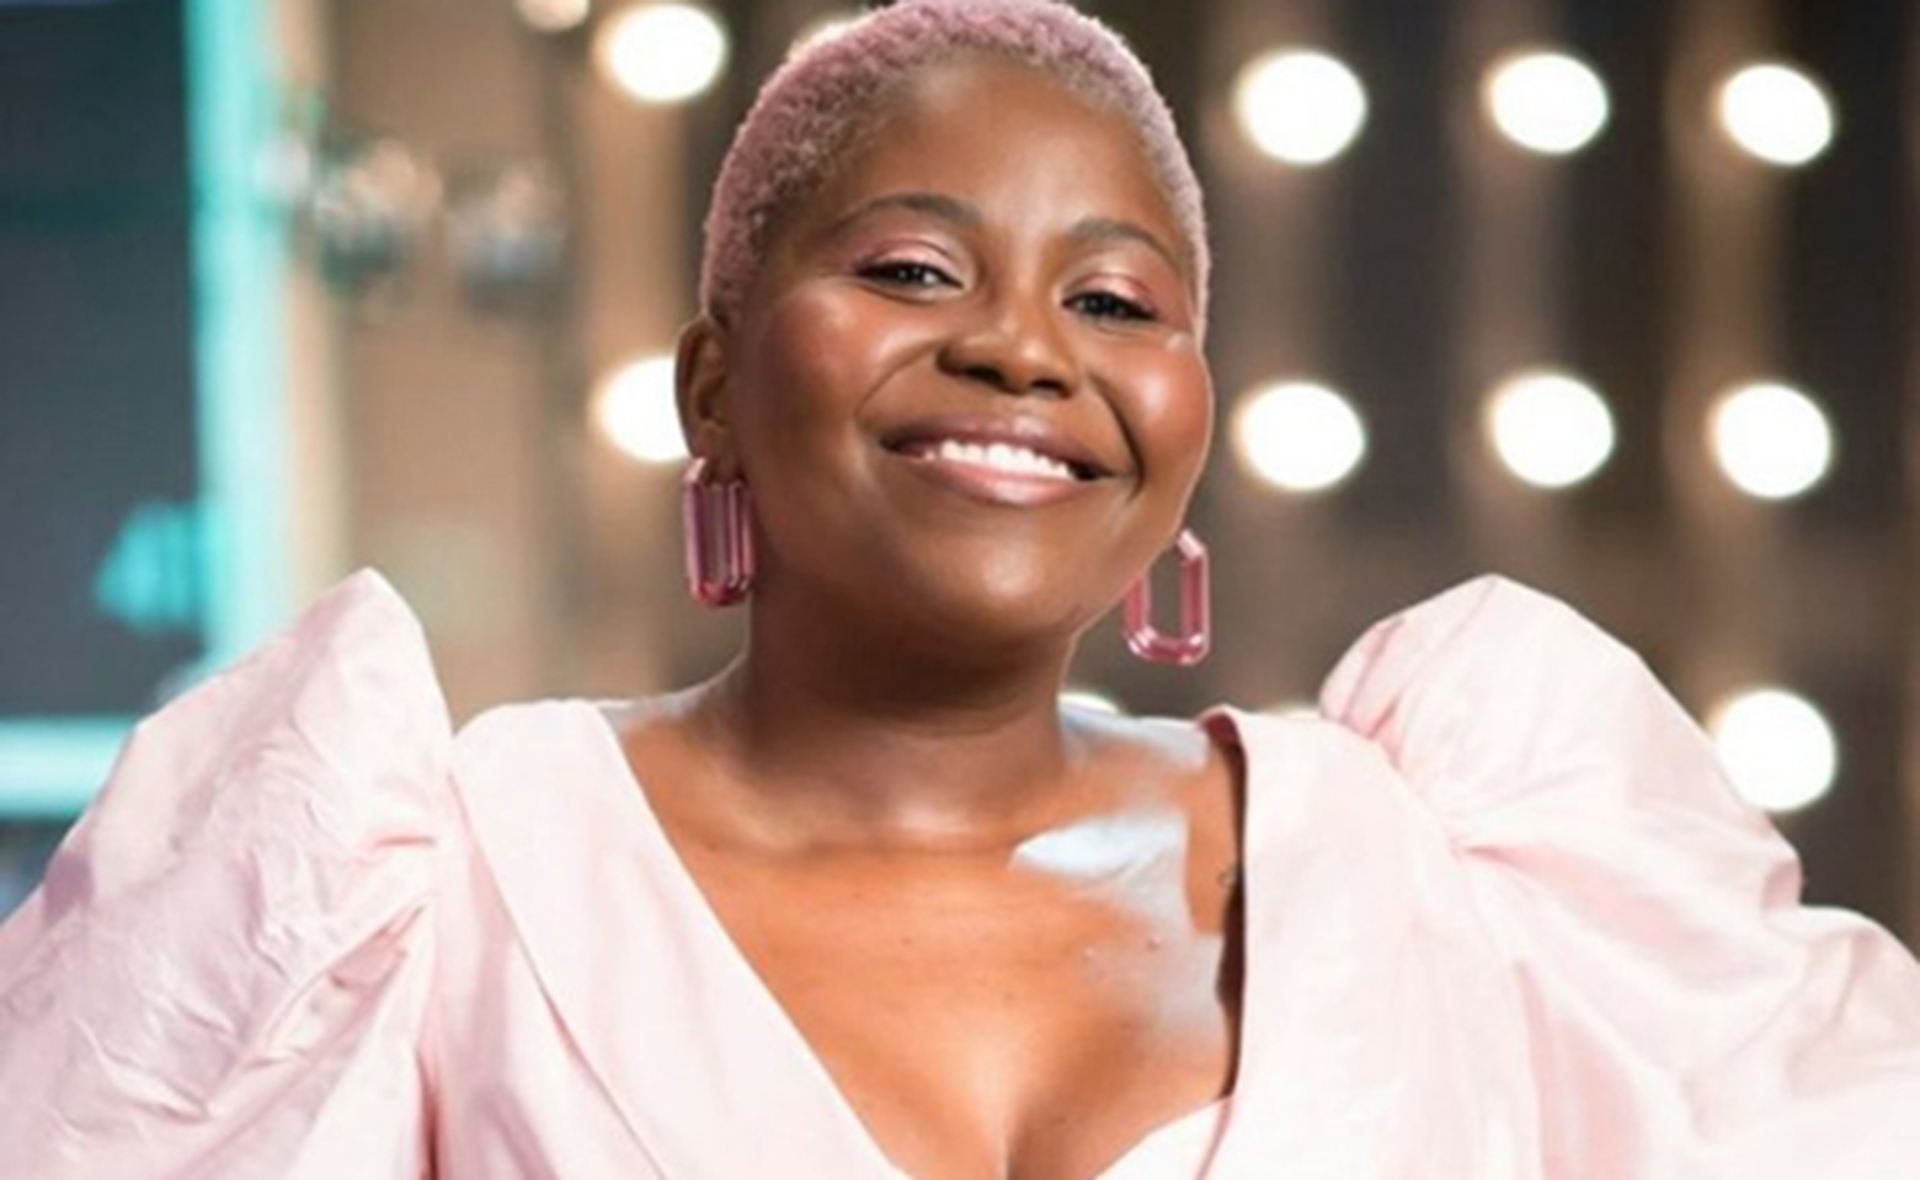 “It’s not very pleasant”: Thando Sikwila dishes on the toughest part of The Voice heading into the finale